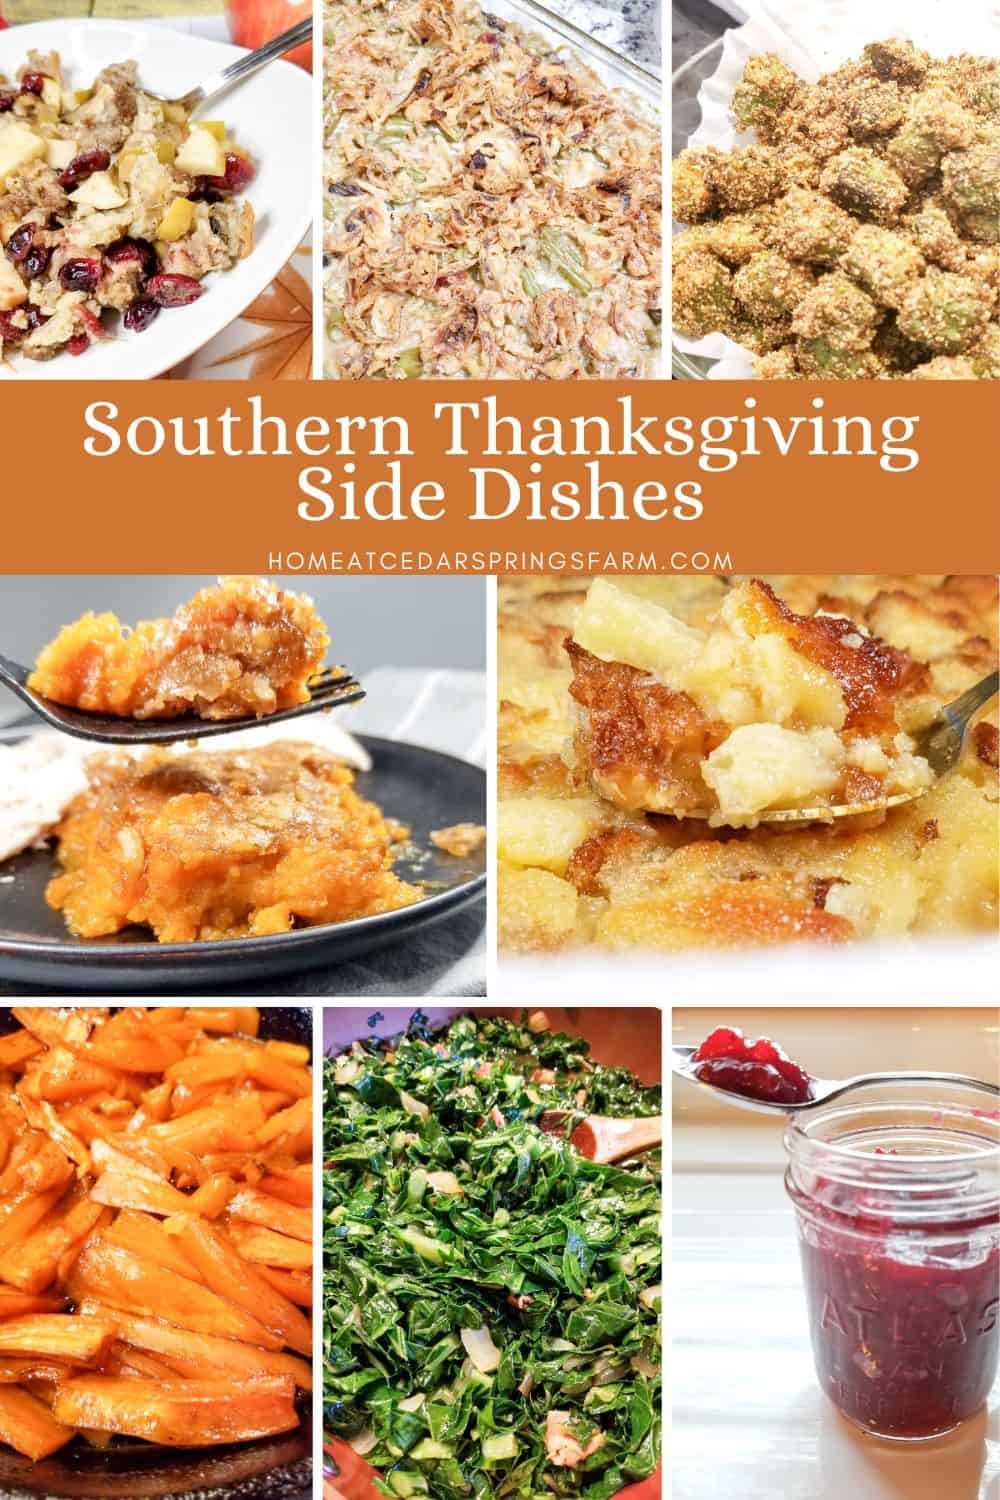 Pictures of several Thanksgiving side dishes with text overlay.